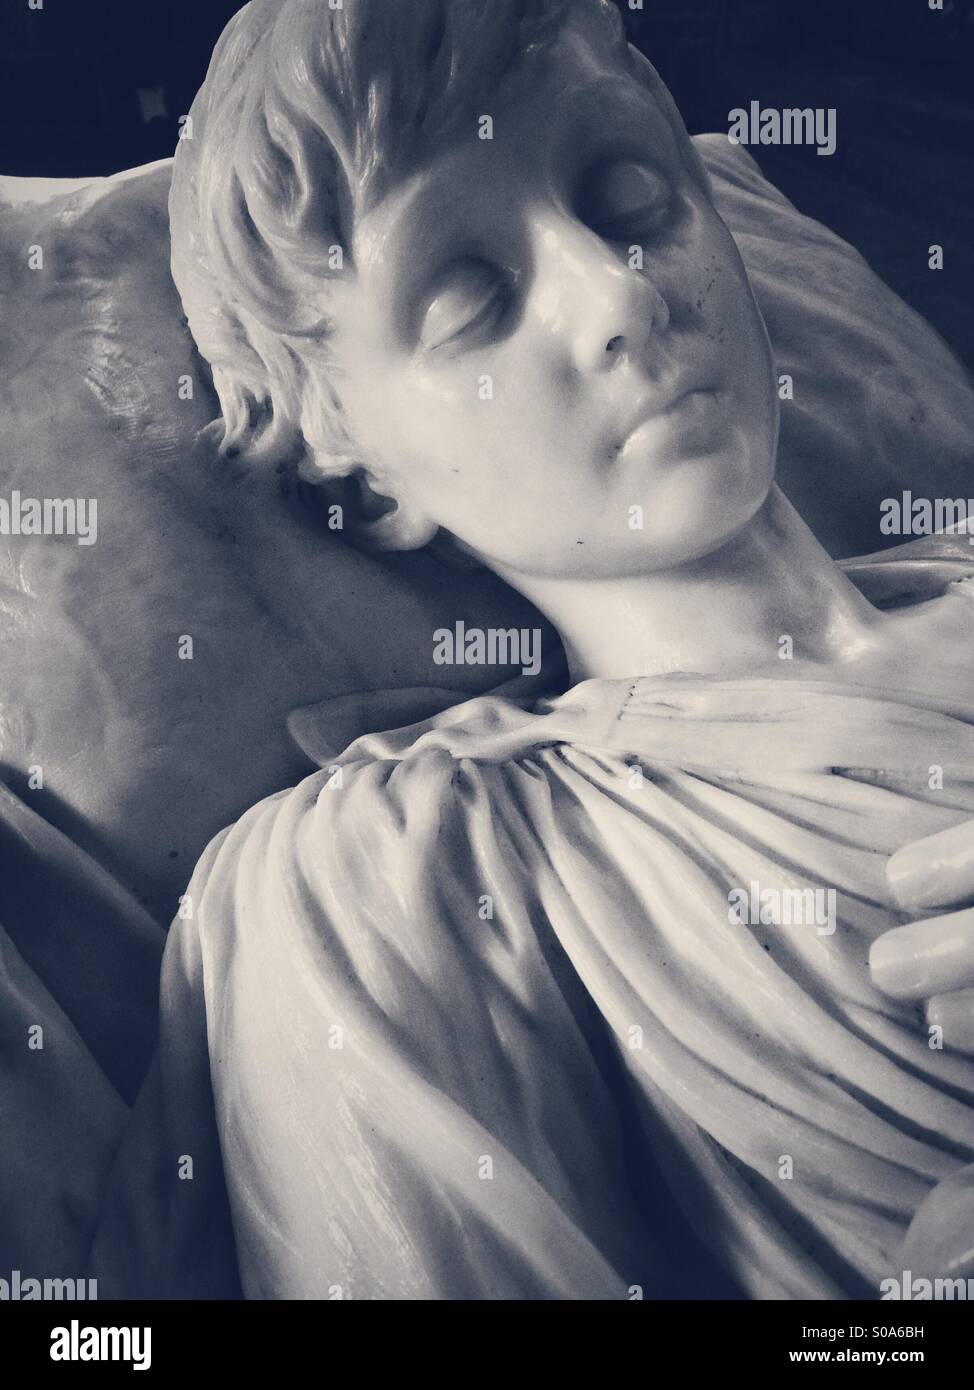 Marble effigy of Robert Charles John Manners, son of the 8th Duke of Rutland, who died in 1894, aged 9. Sited in the chapel at Haddon Hall, Bakewell, Derbyshire, England. Stock Photo